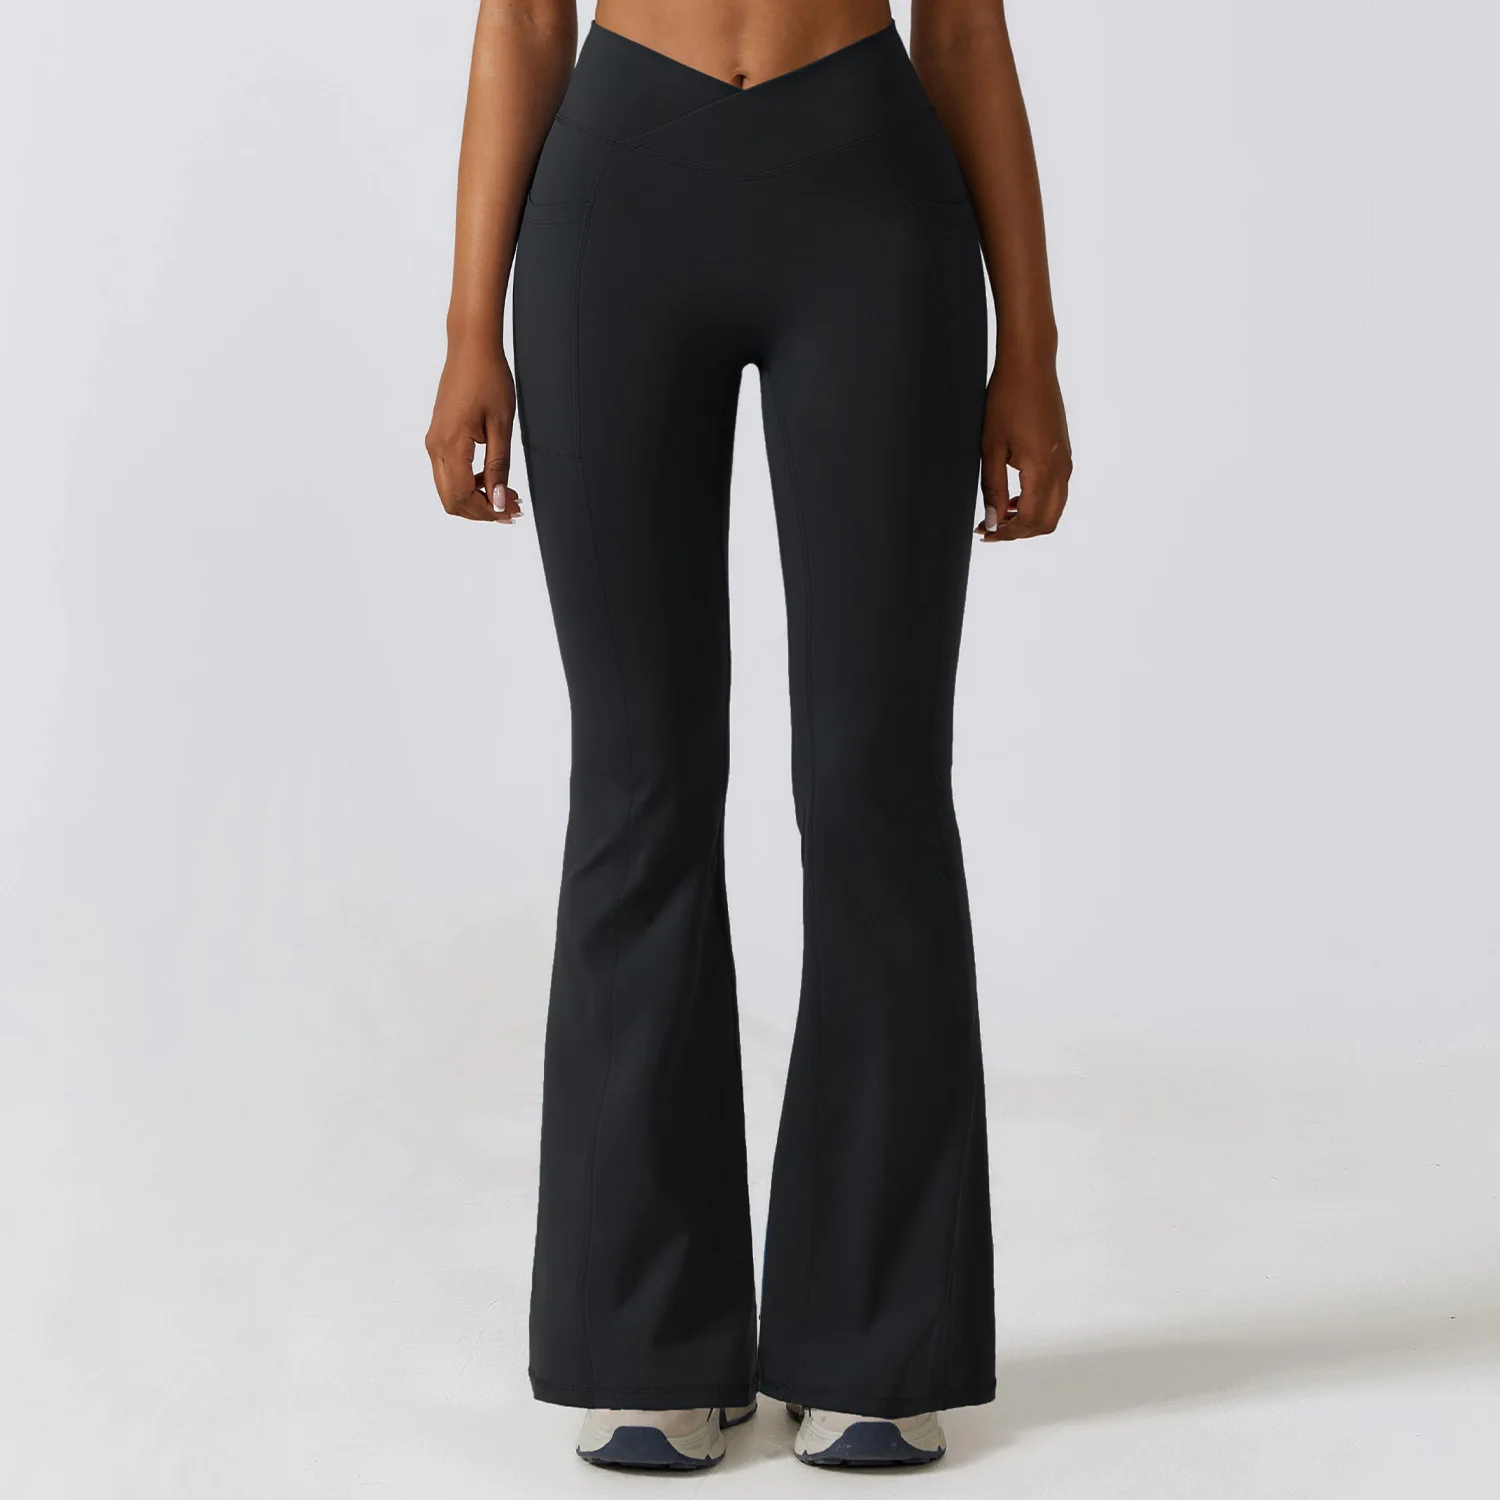 Women's Soft Touch Flare Pants, 31.5